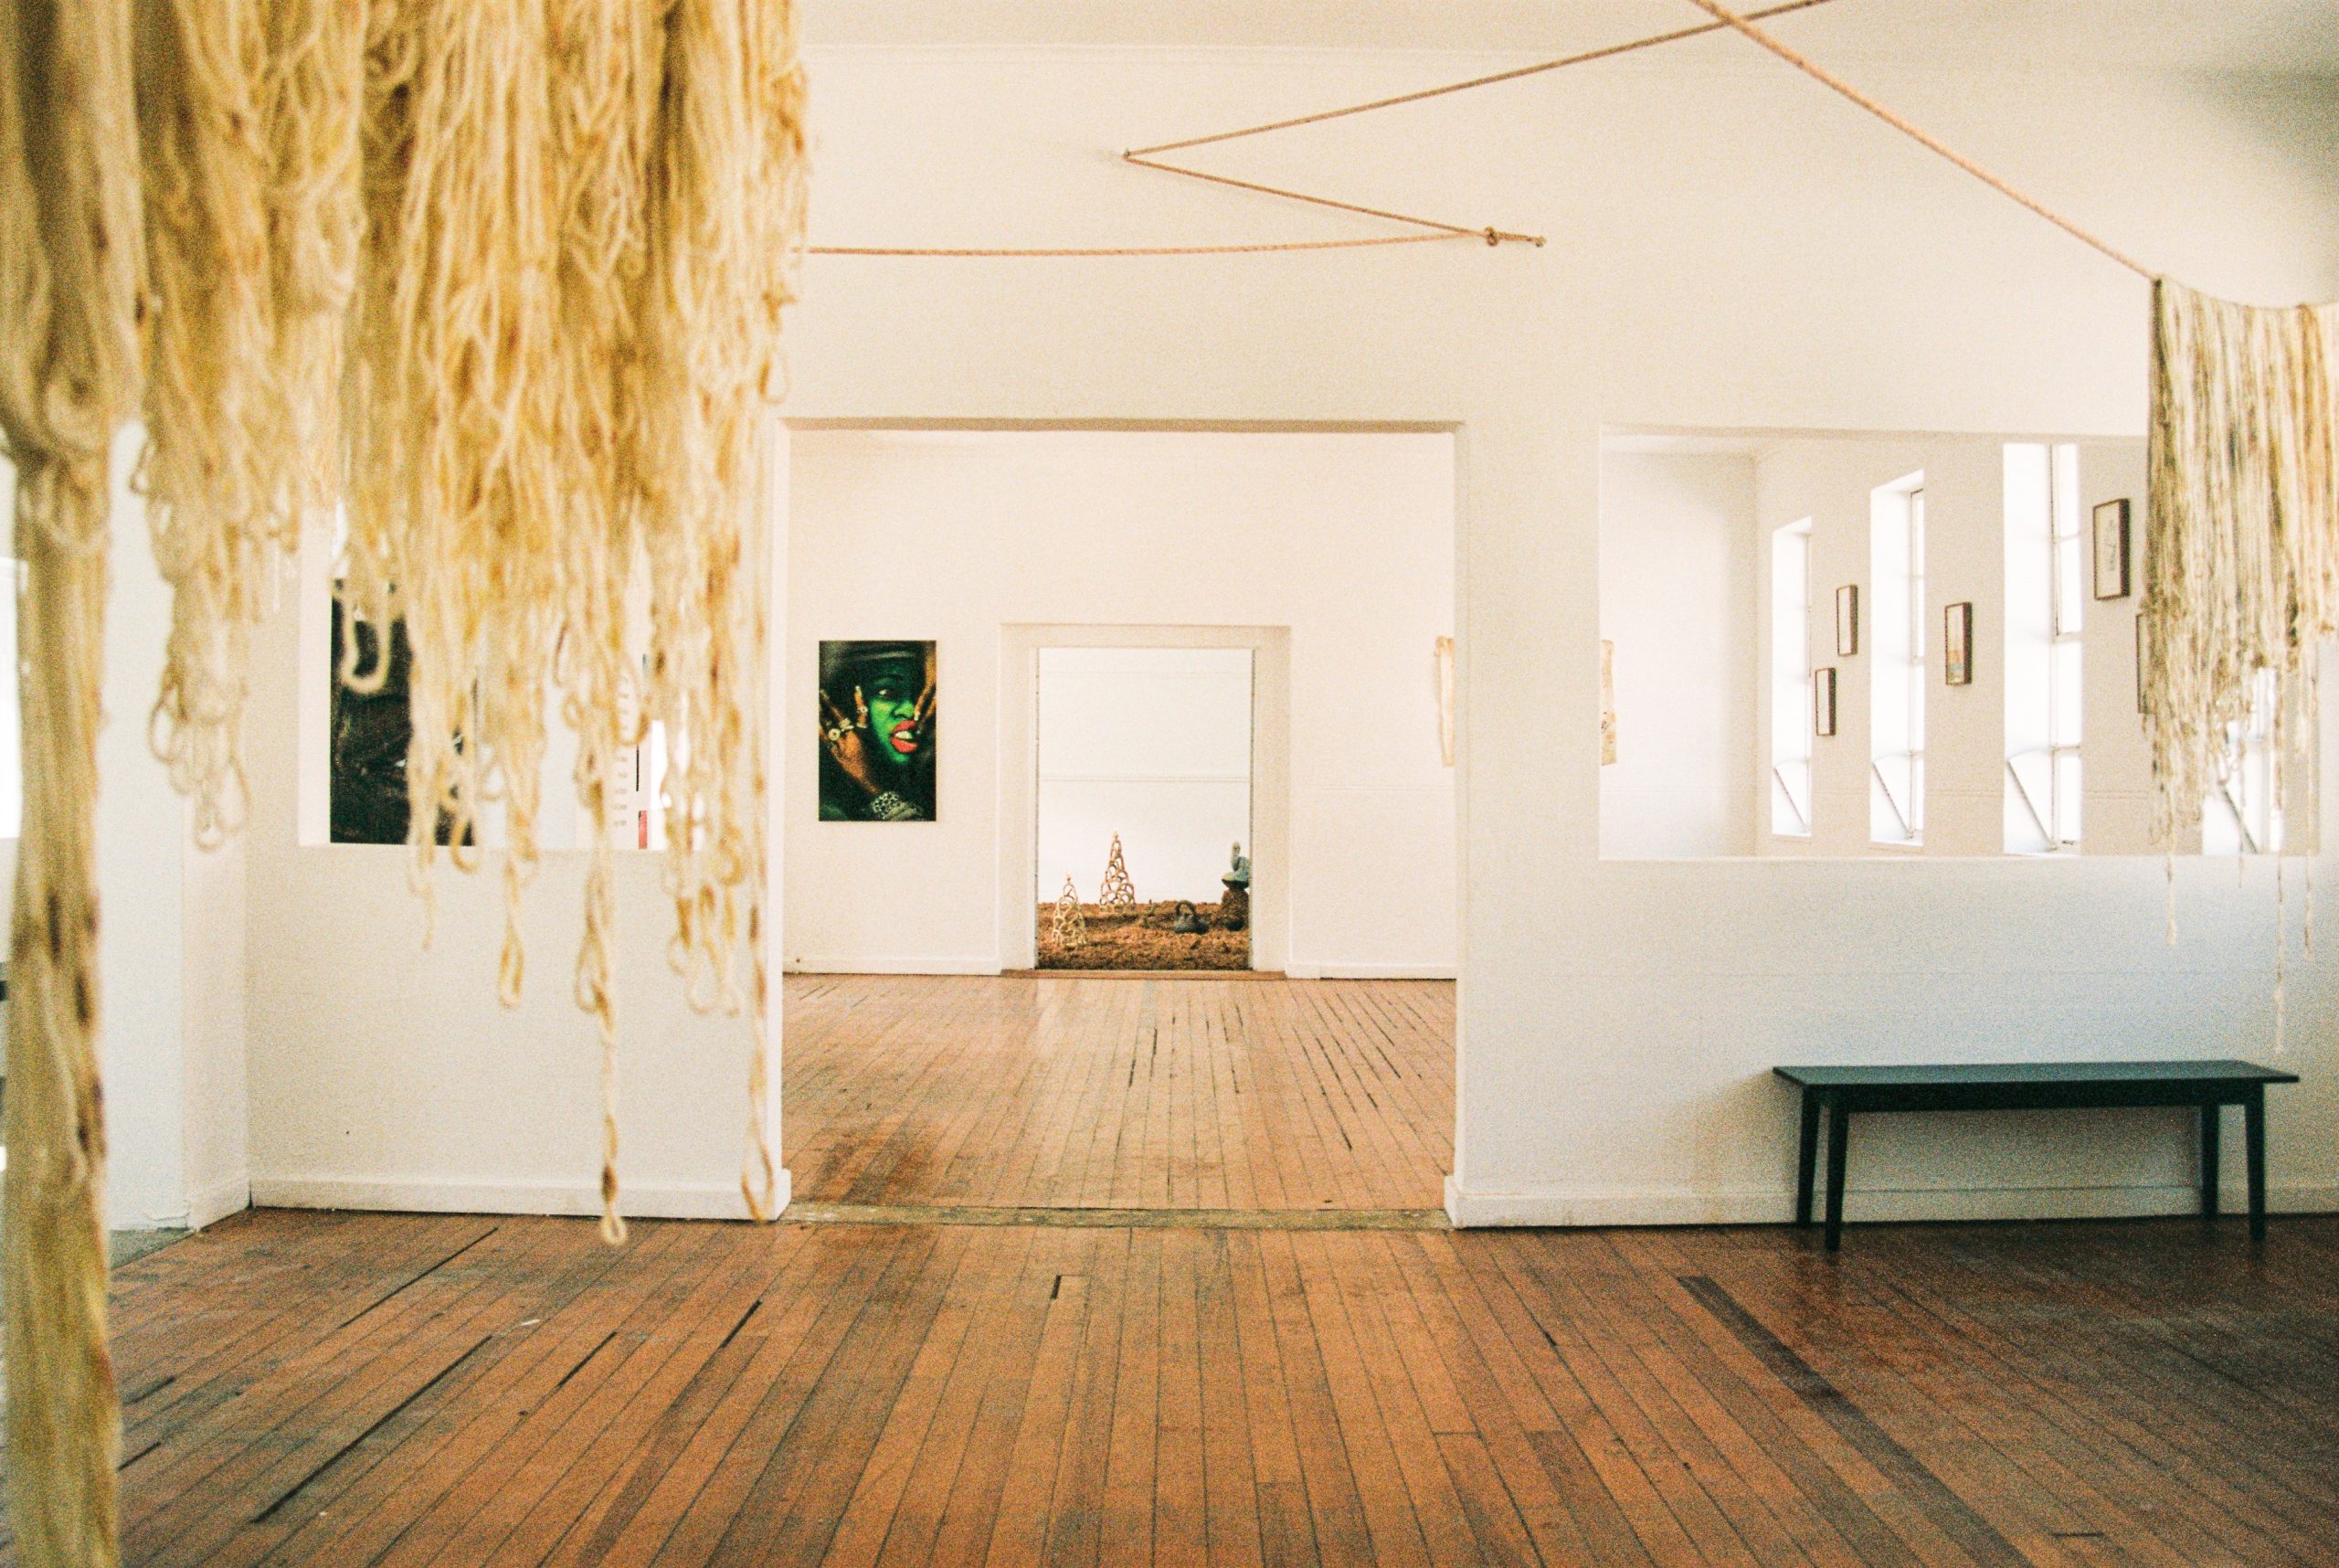 Installation view of PROCESS at Fede Arthouse